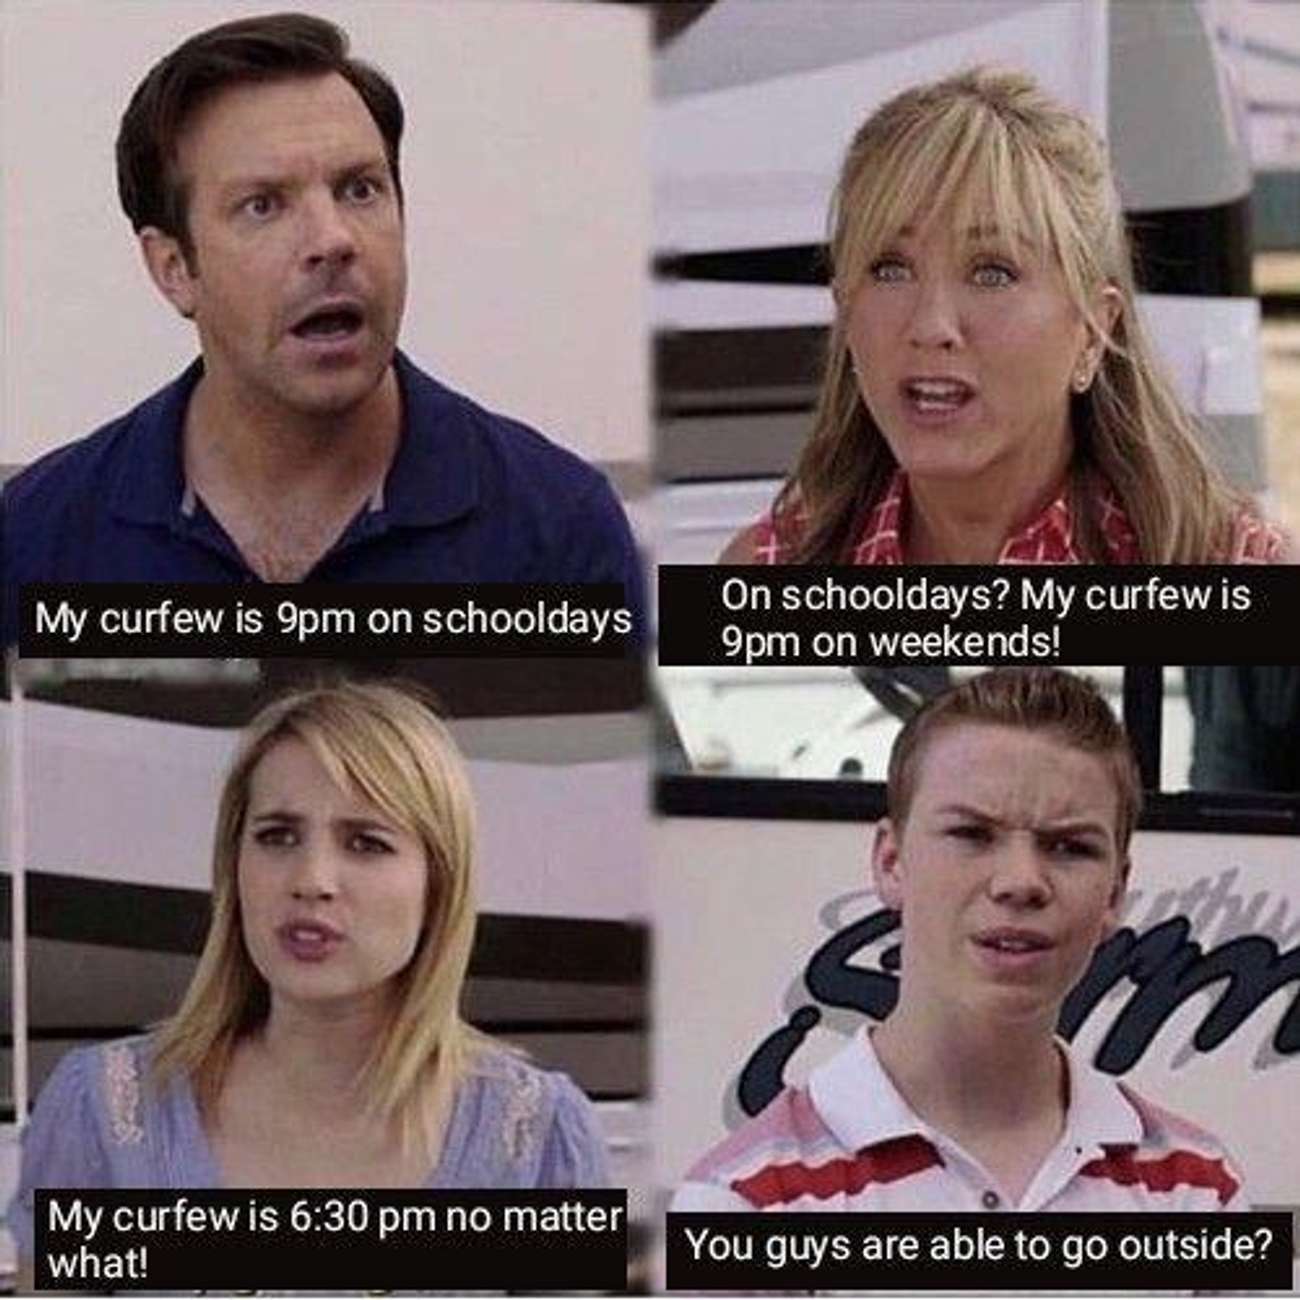 you guys getting paid meme template - My curfew is 9pm on schooldays On schooldays? My curfew is 9pm on weekends! My curfew is no matter what! You guys are able to go outside?